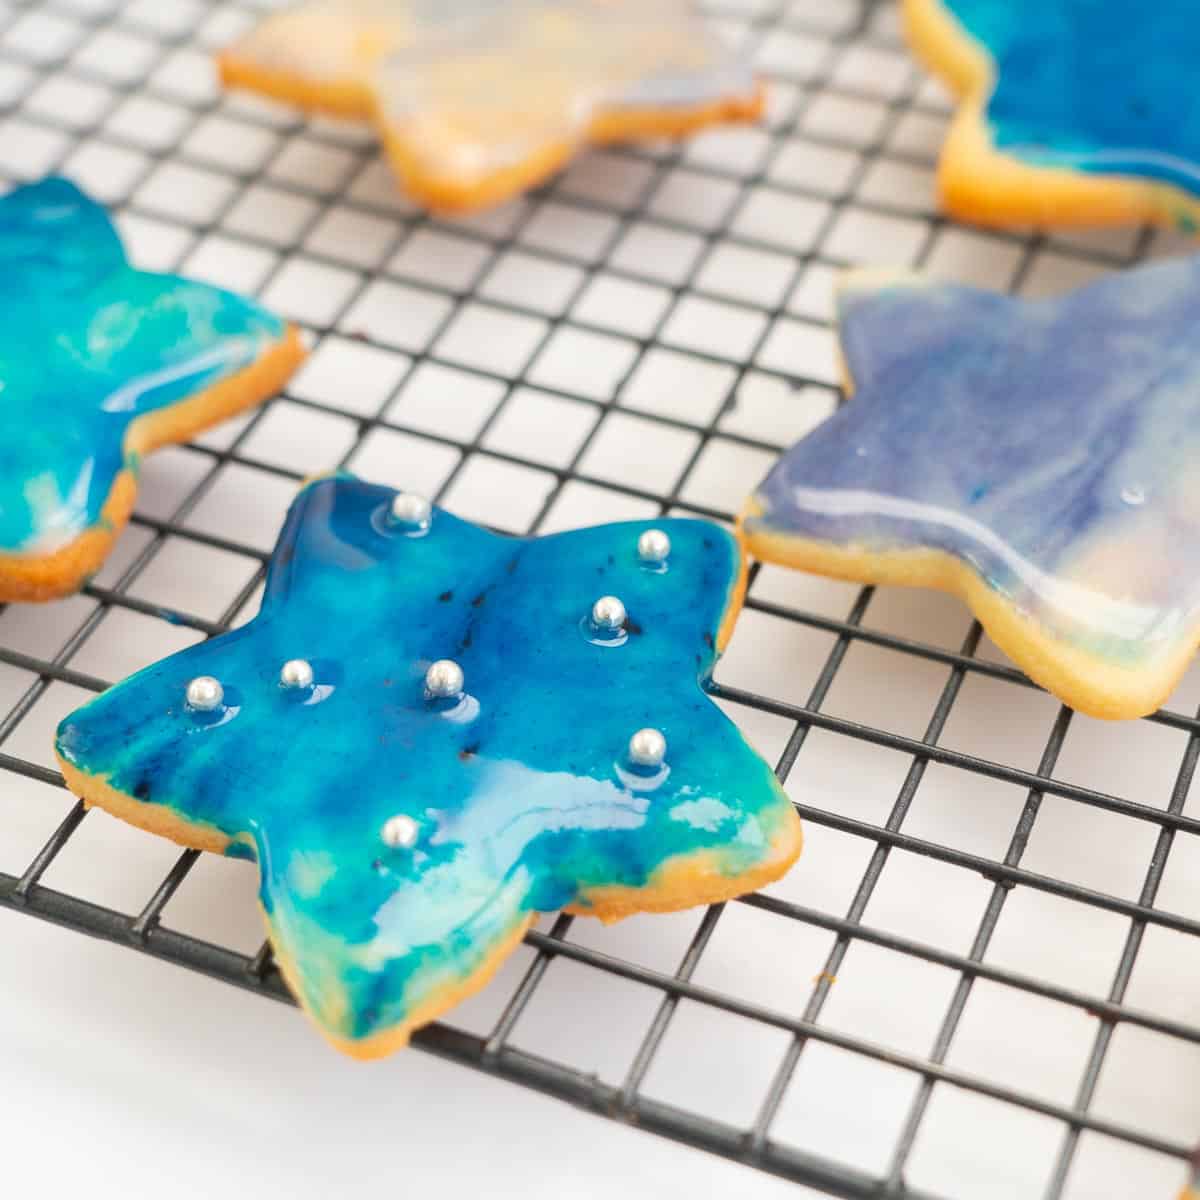 A blue galaxy iced cookie on a cooling rack decorated with edible silver balls.